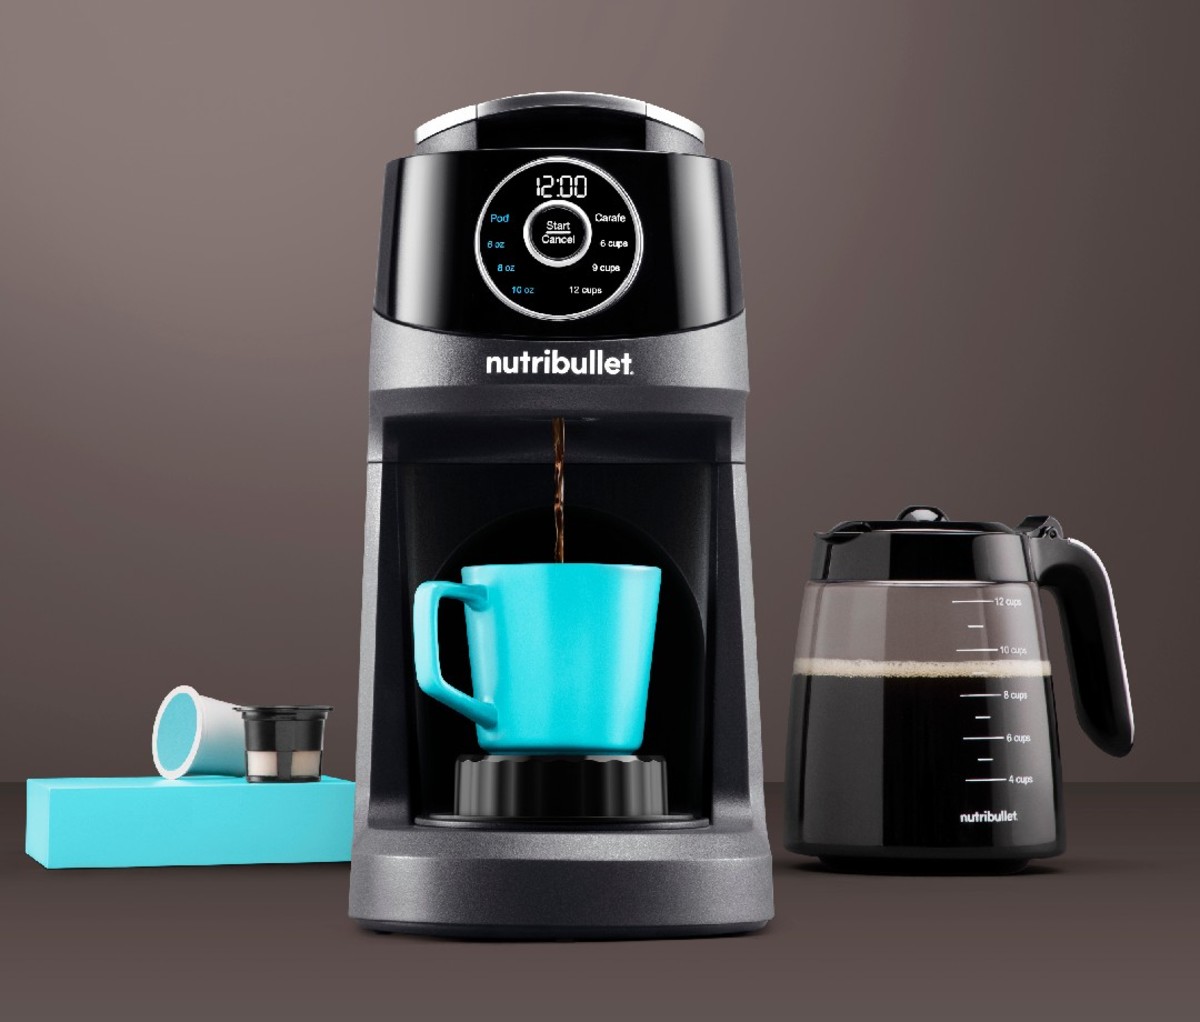 nutribullet Brew Choice Pod + Carafe with full put of coffee and turquoise cup